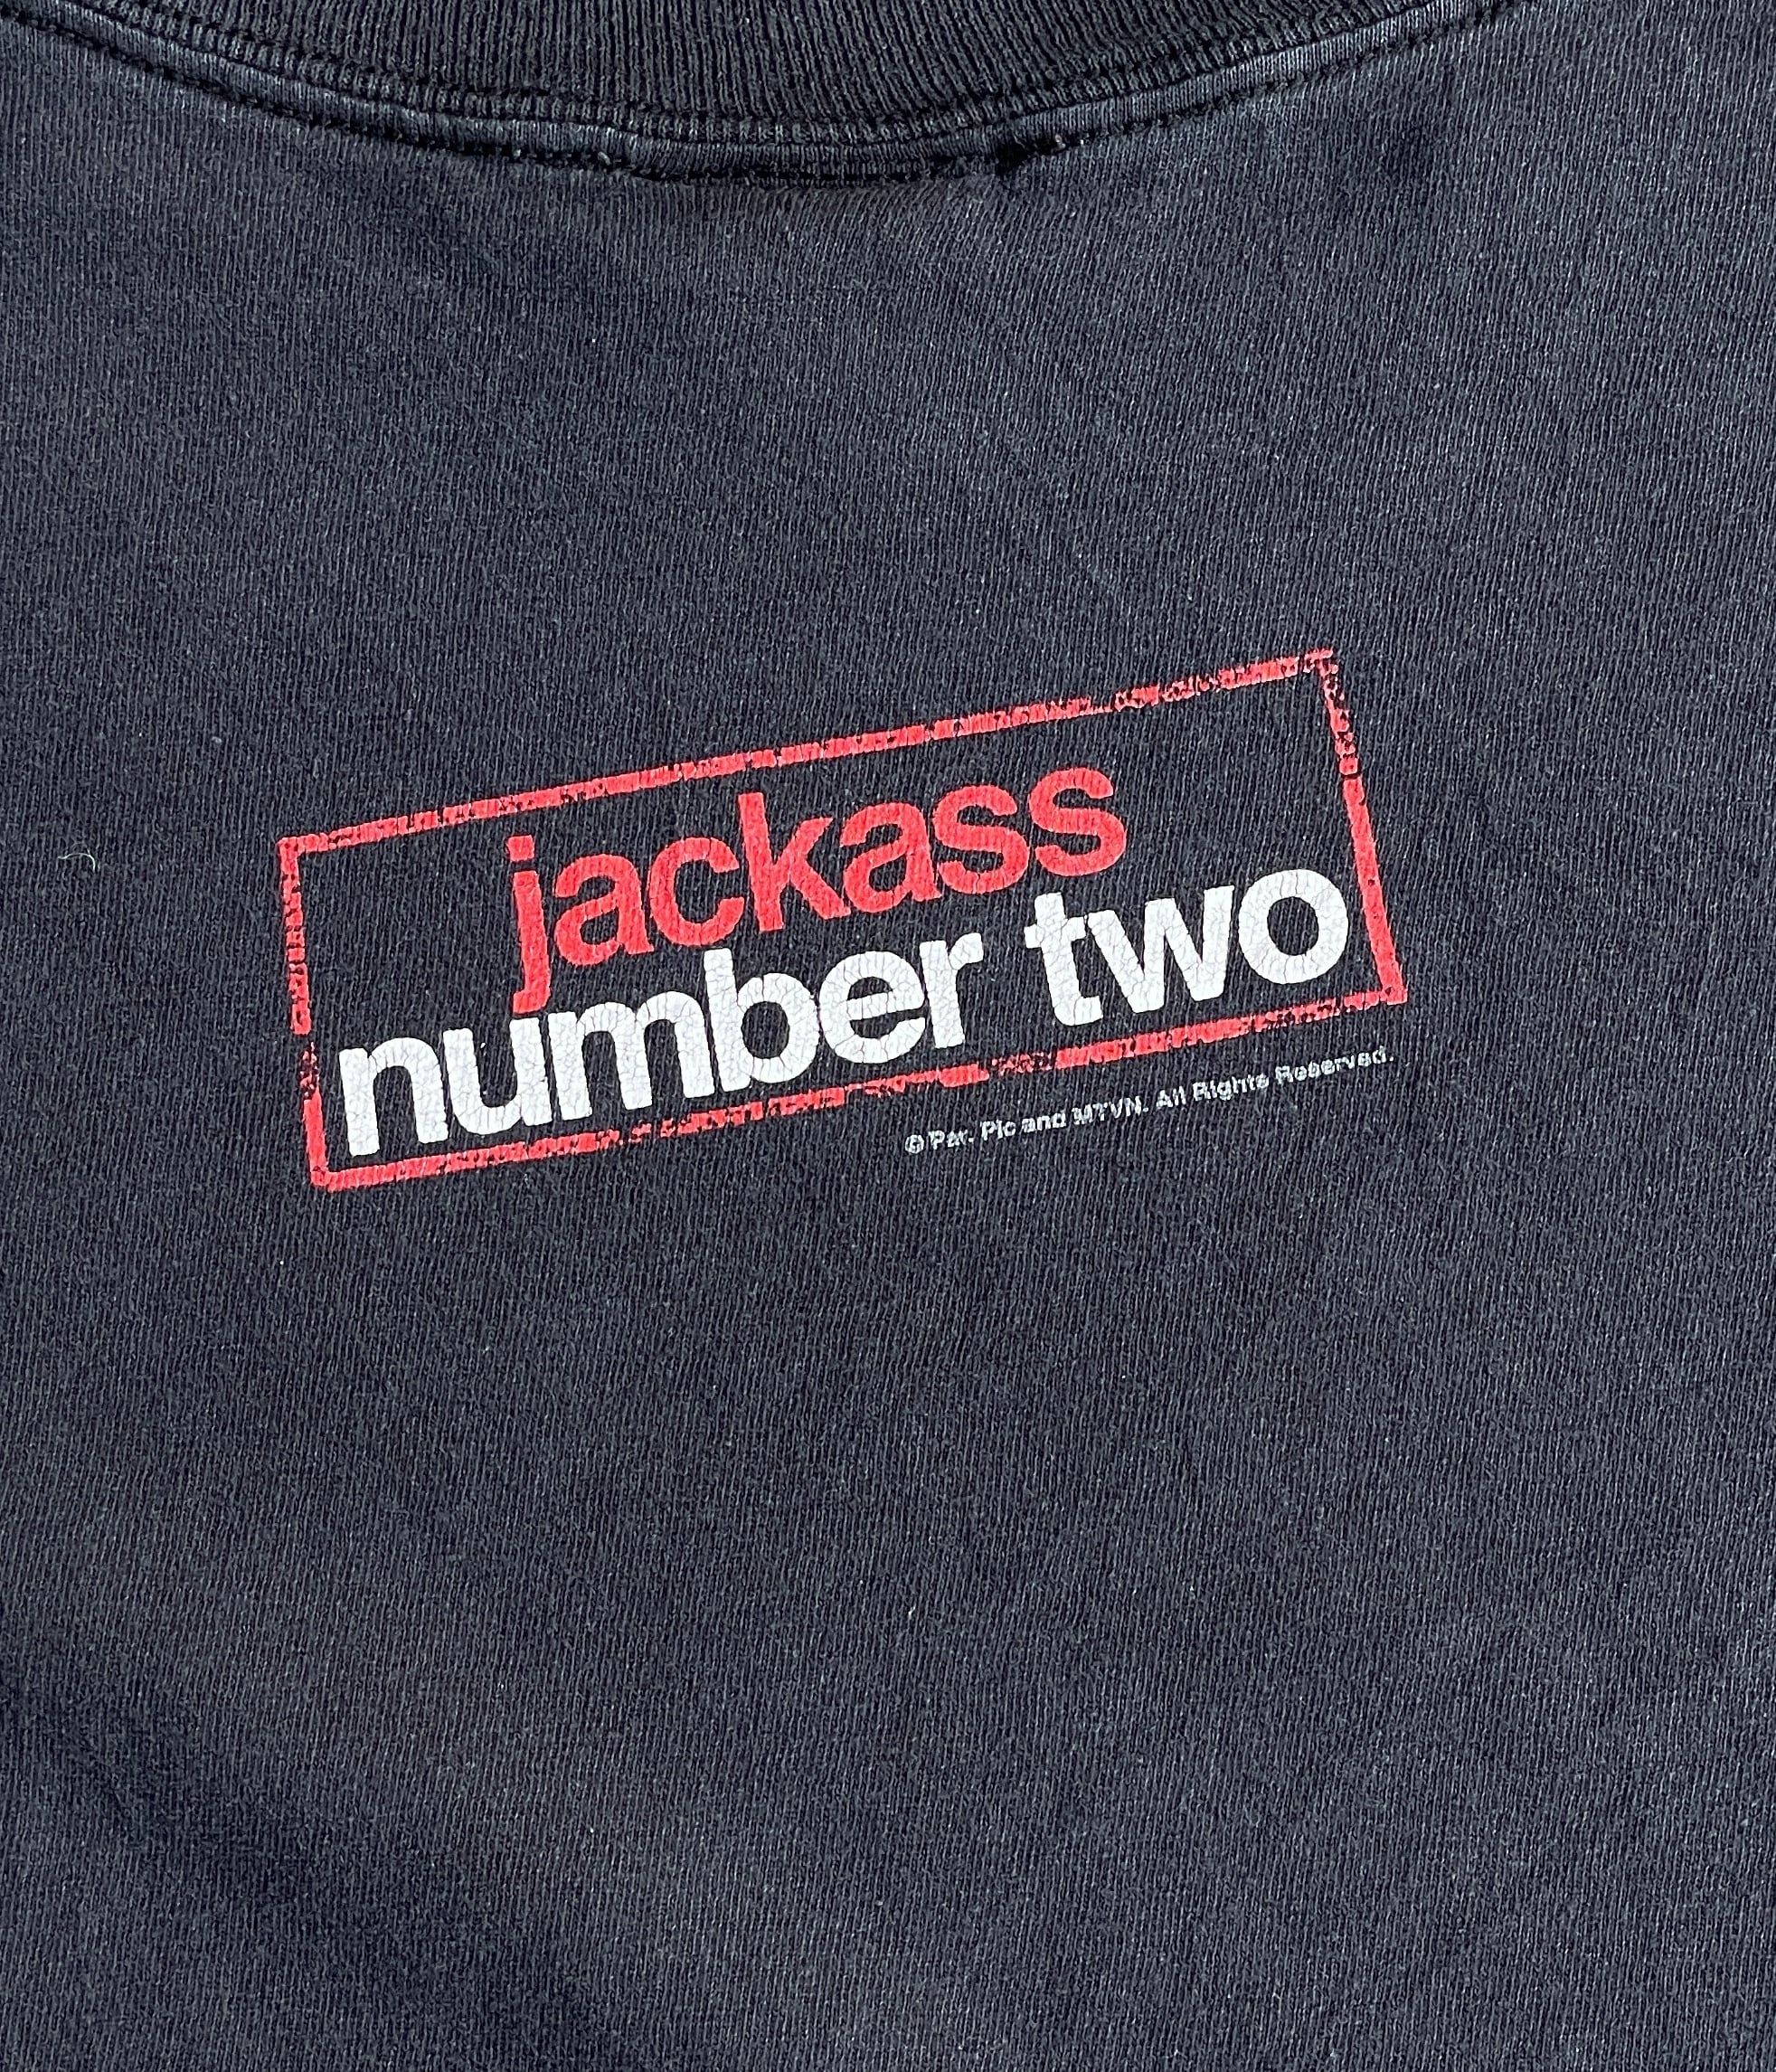 Vintage 00s Movie T-shirt -Jackass- | BEGGARS BANQUET公式通販サイト　古着・ヴィンテージ